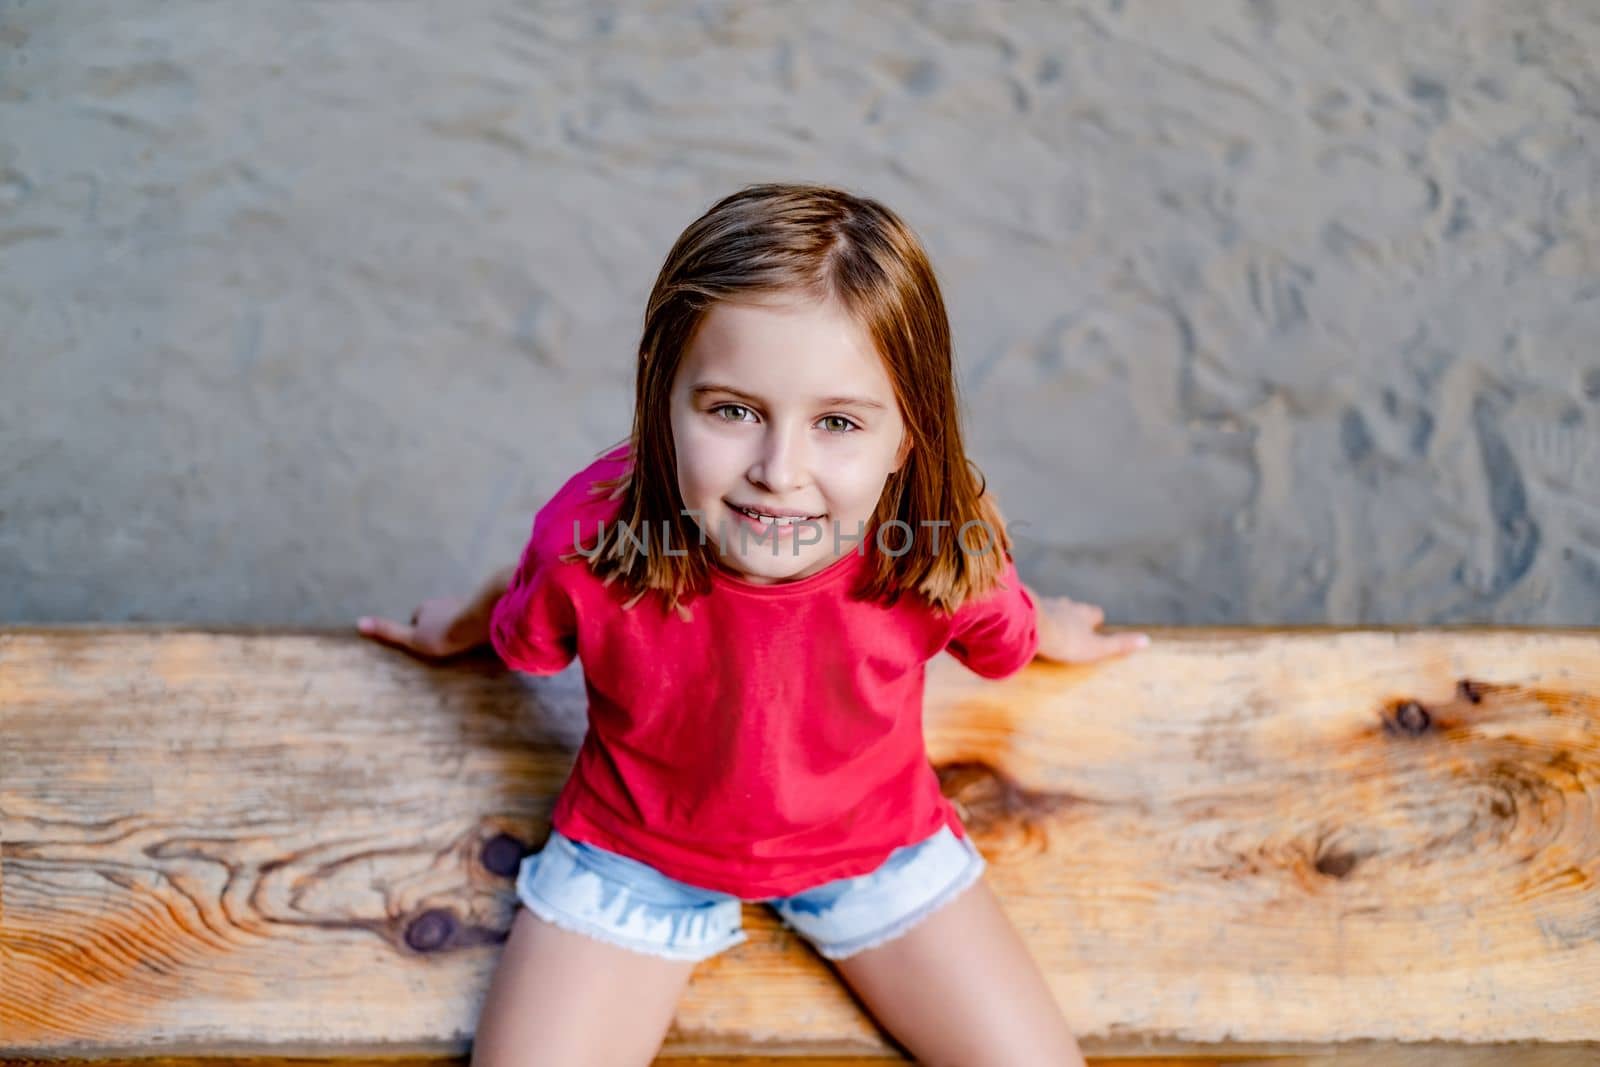 Portrait of smiling little girl sitting on wooden bench, top view